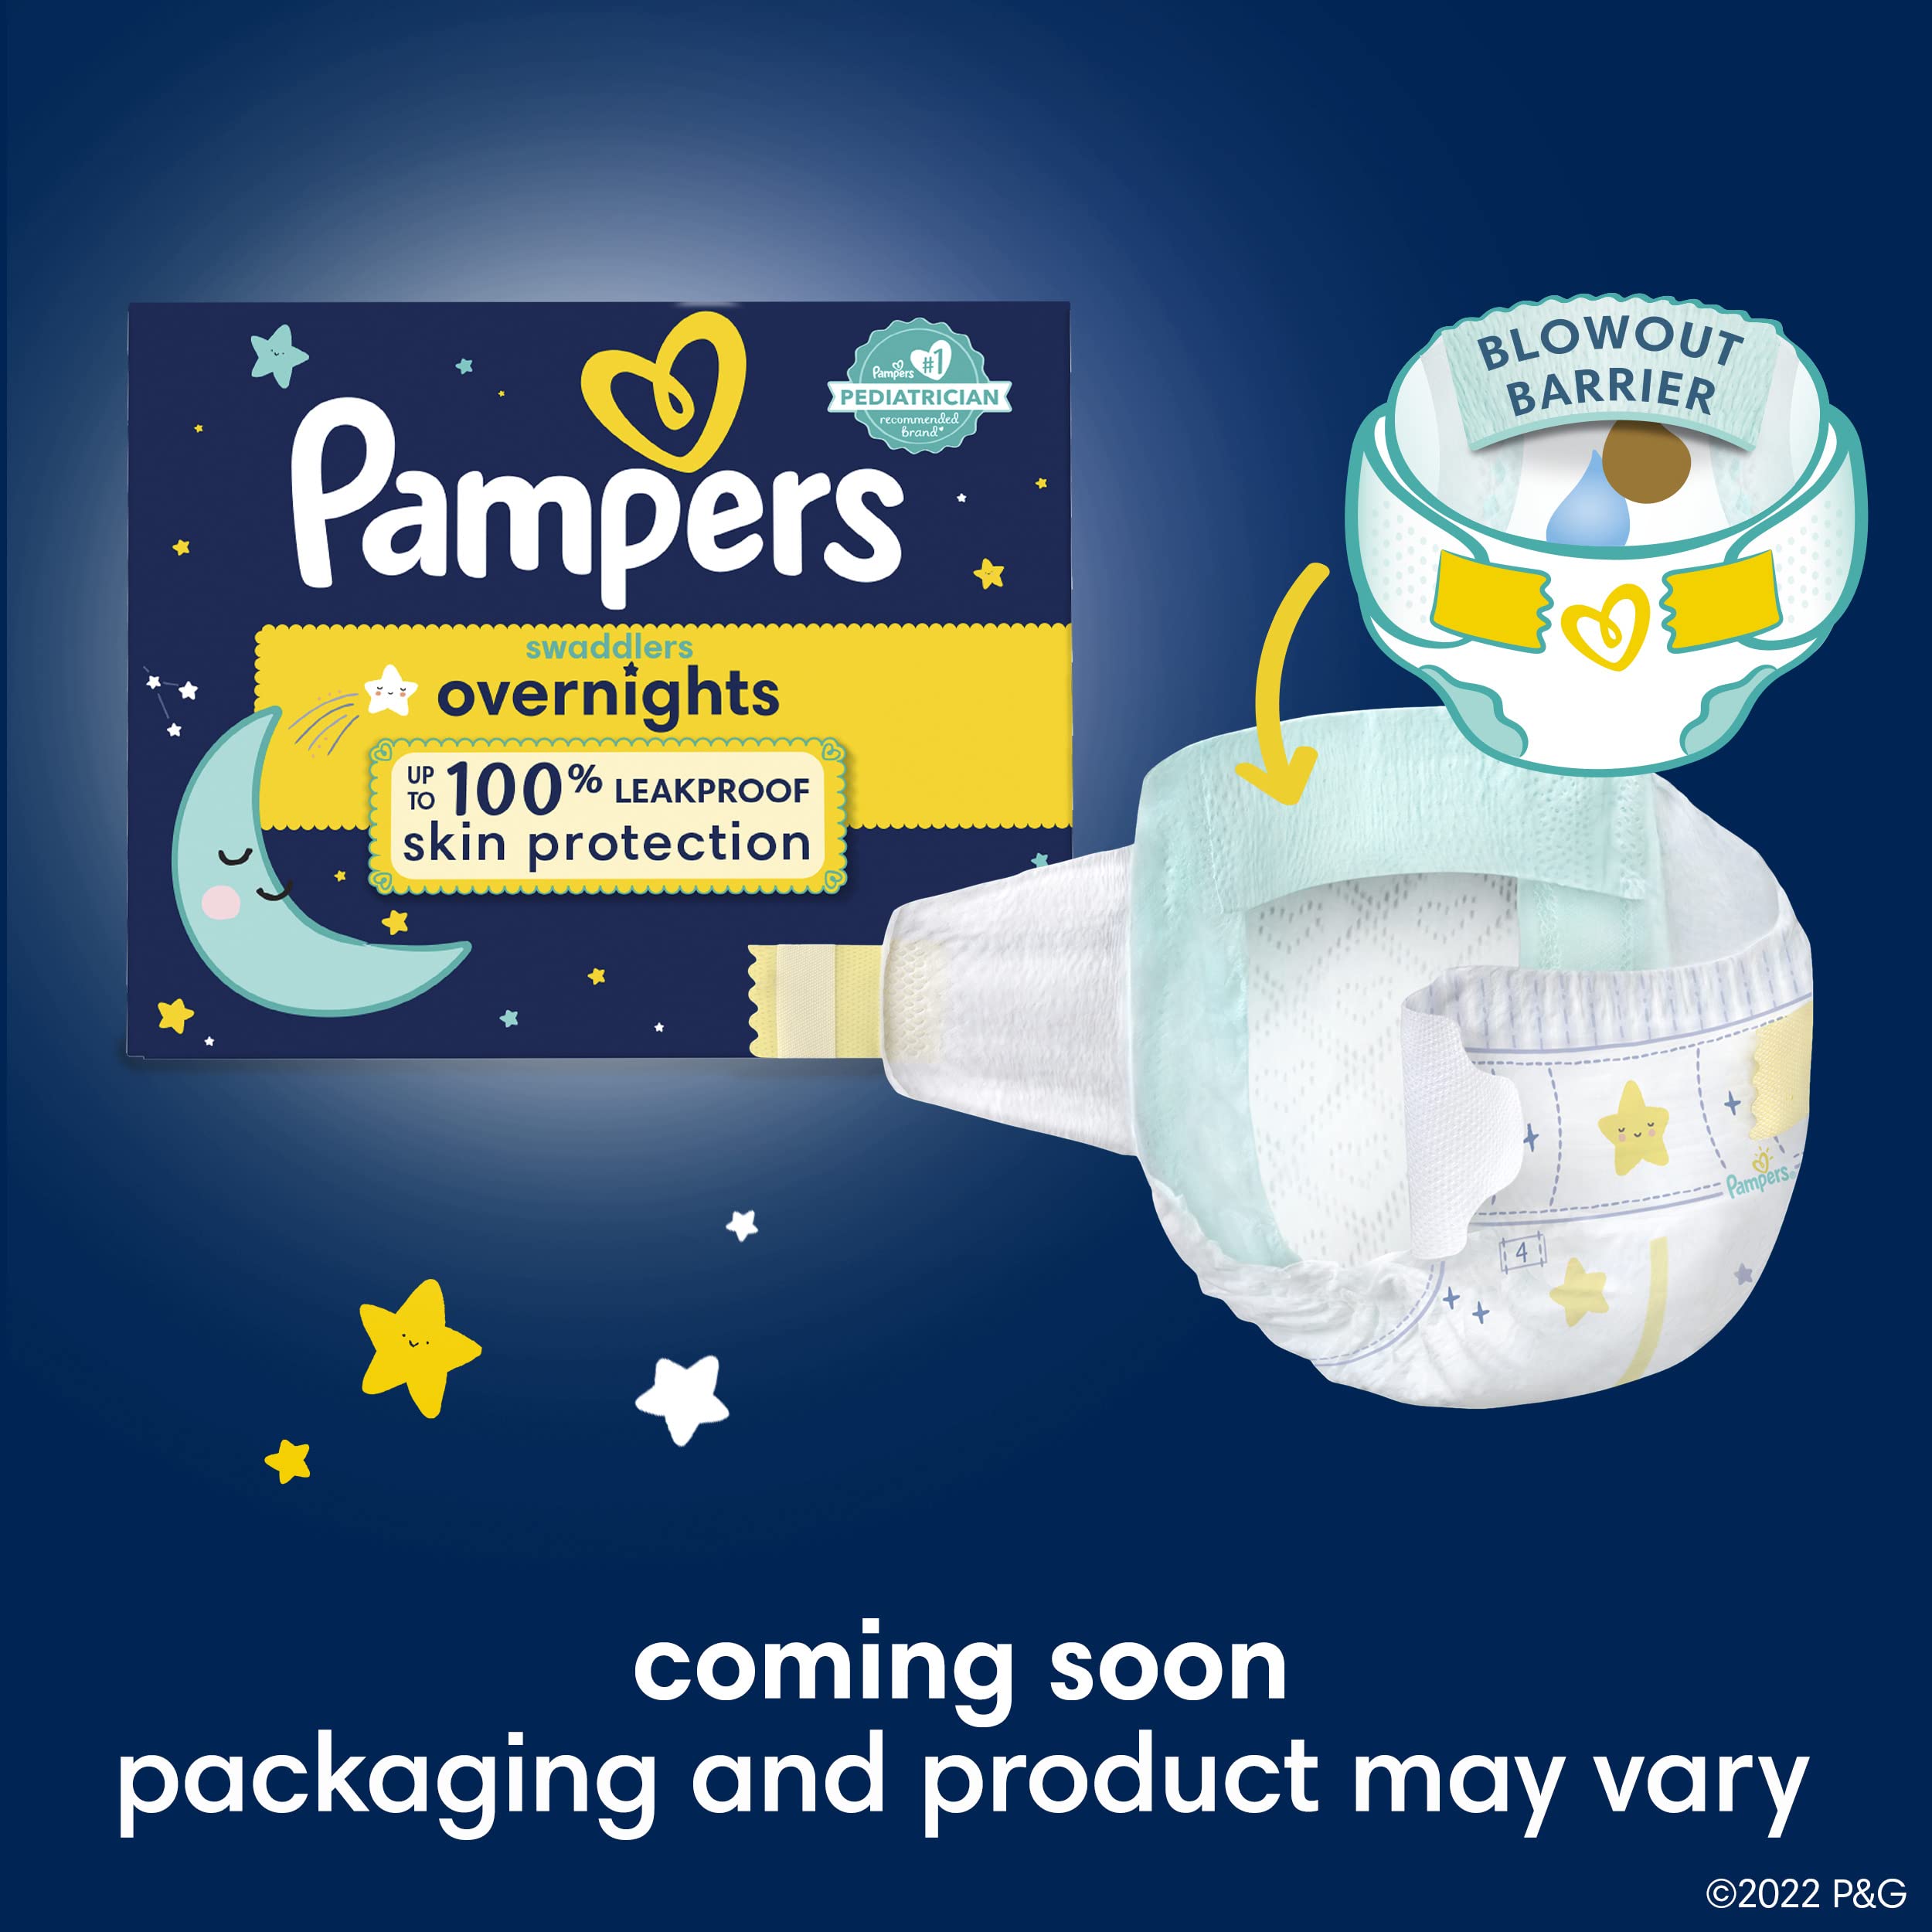 Pampers Swaddlers Overnight Diapers Size 7 36 Count